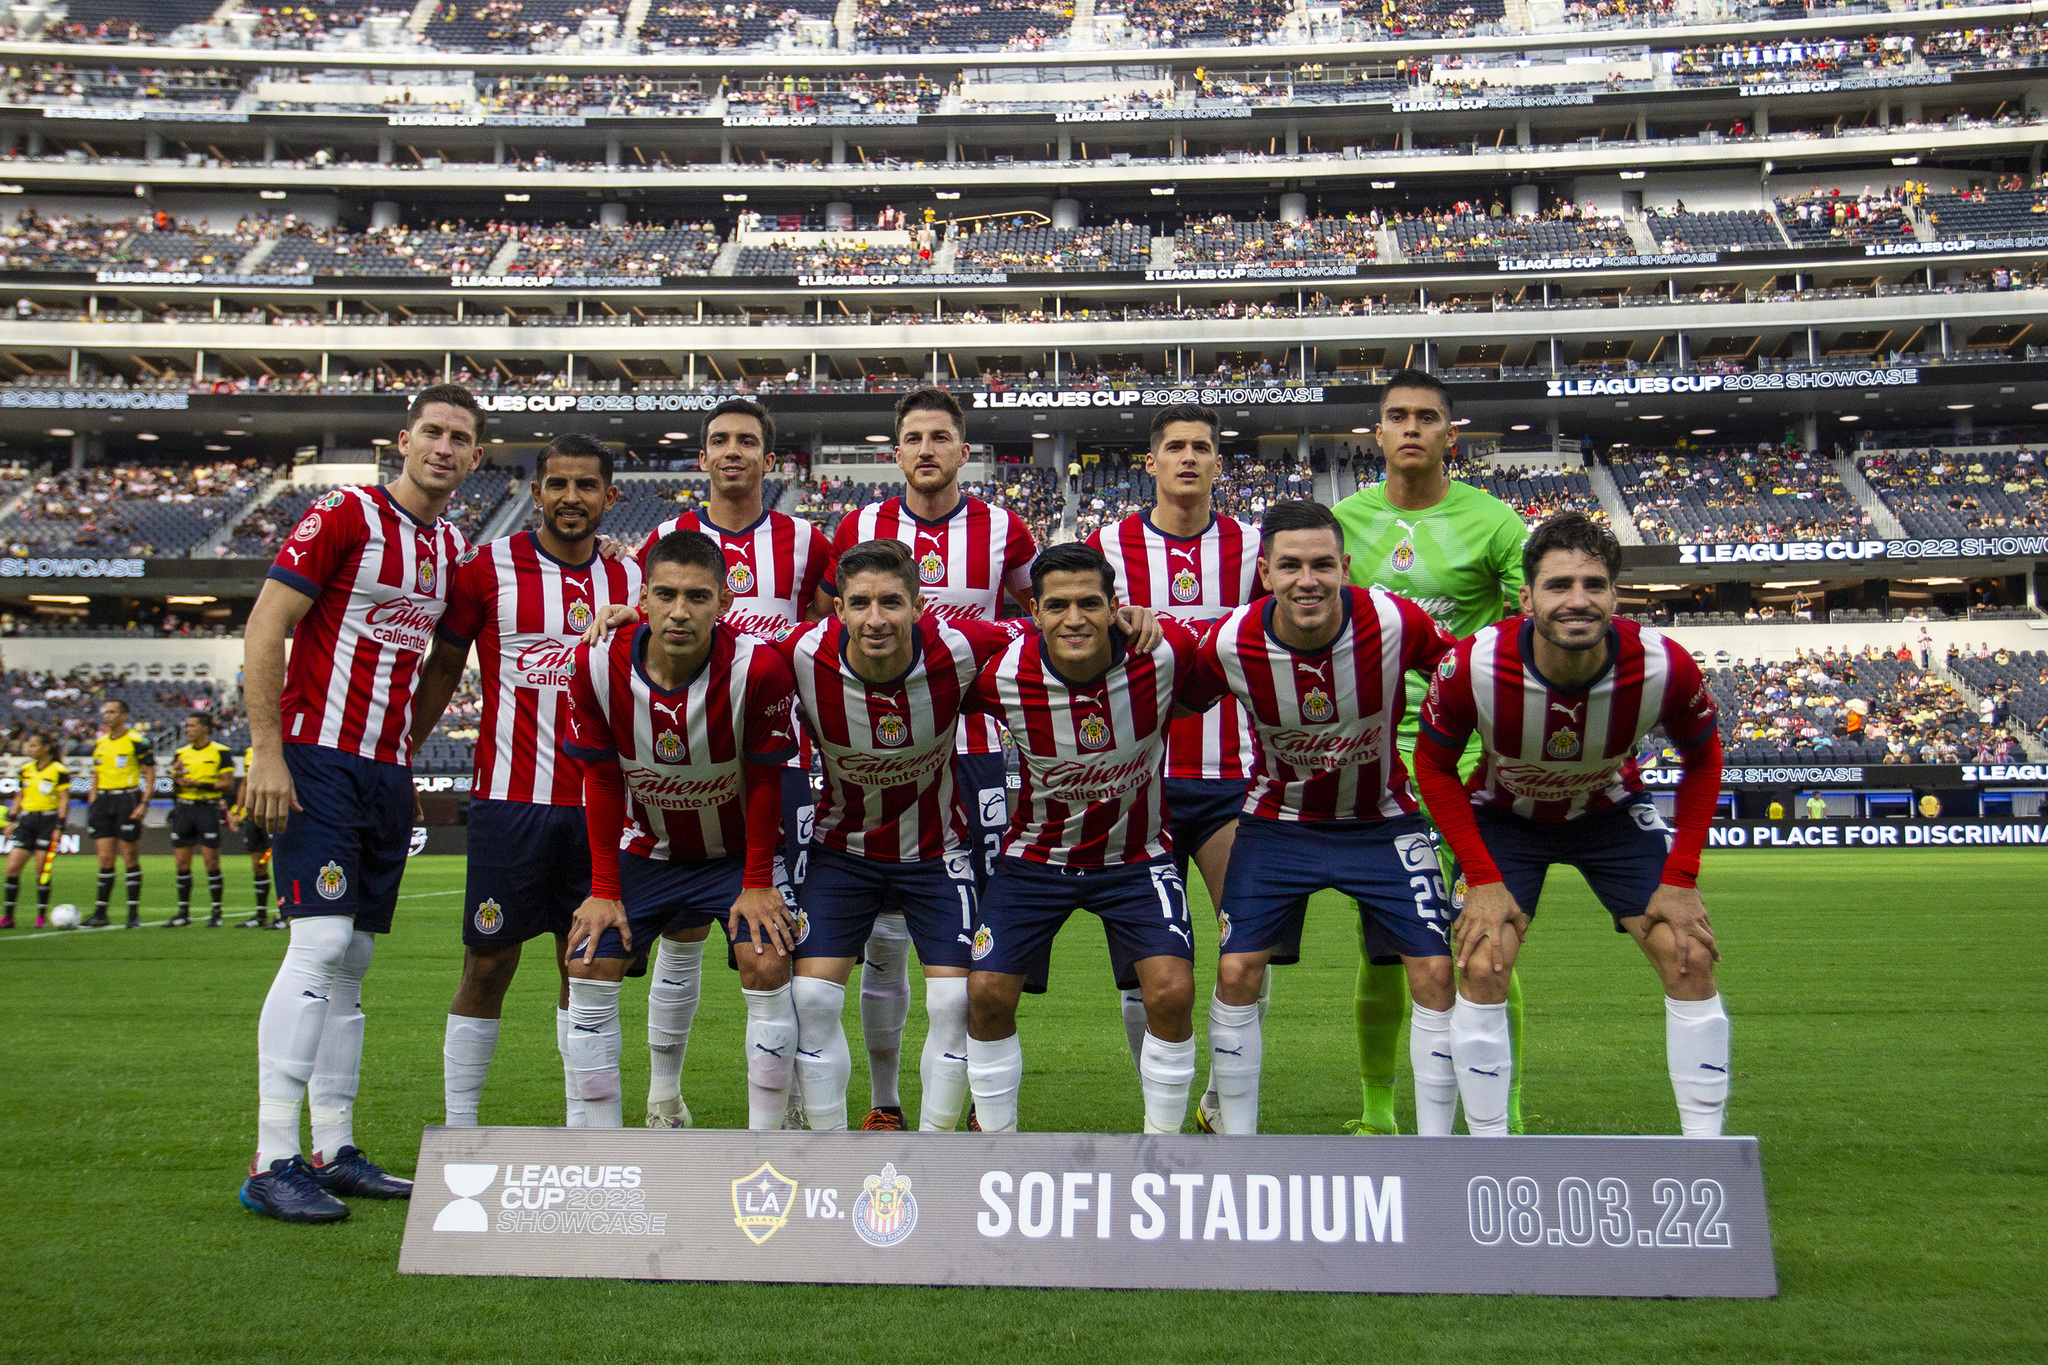 Chivas vs LA Galaxy, live the match of the Leagues Cup 2022: result and goals at the moment